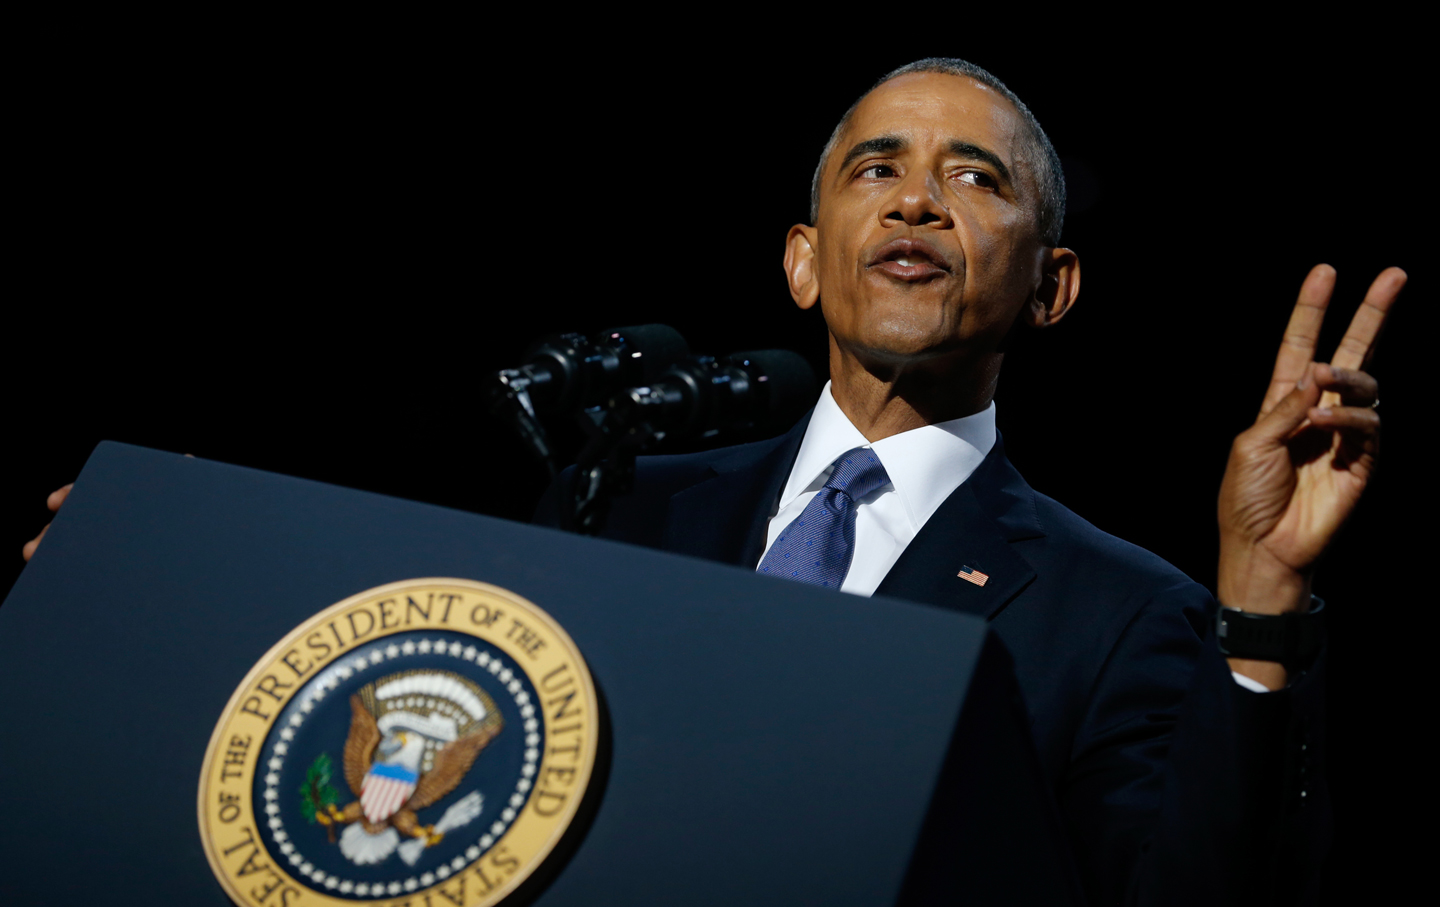 Obama Spoke to a Better America—but Does that Country Still Exist?